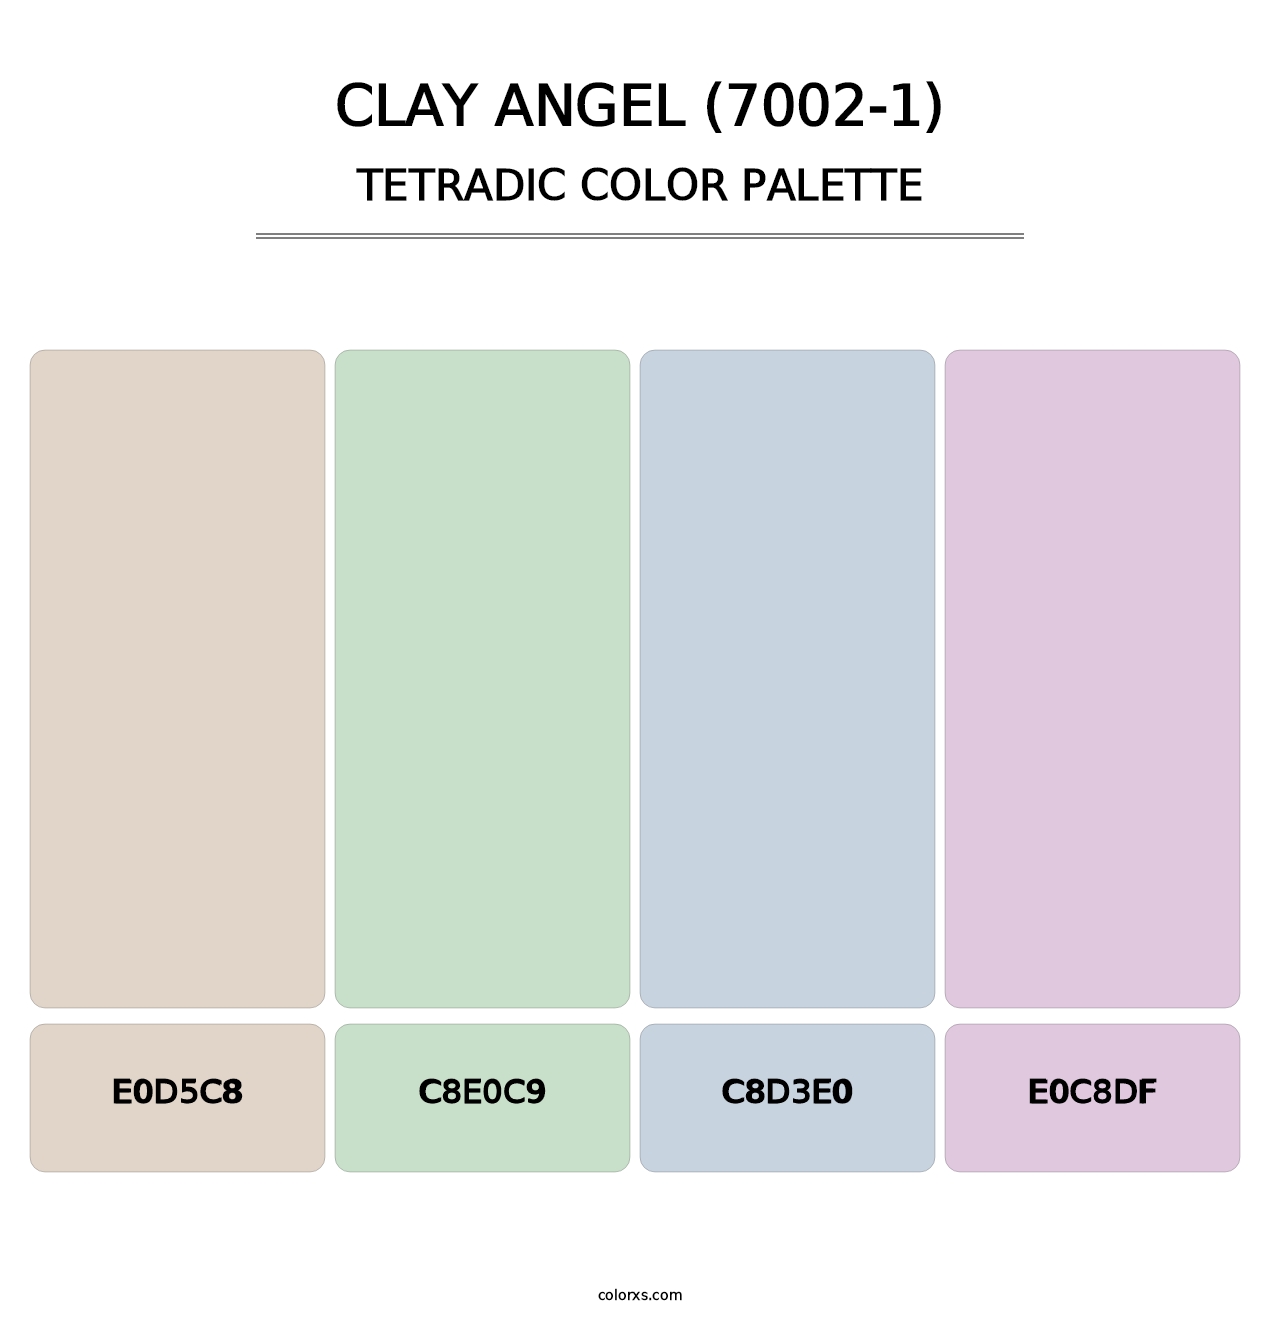 Clay Angel (7002-1) - Tetradic Color Palette